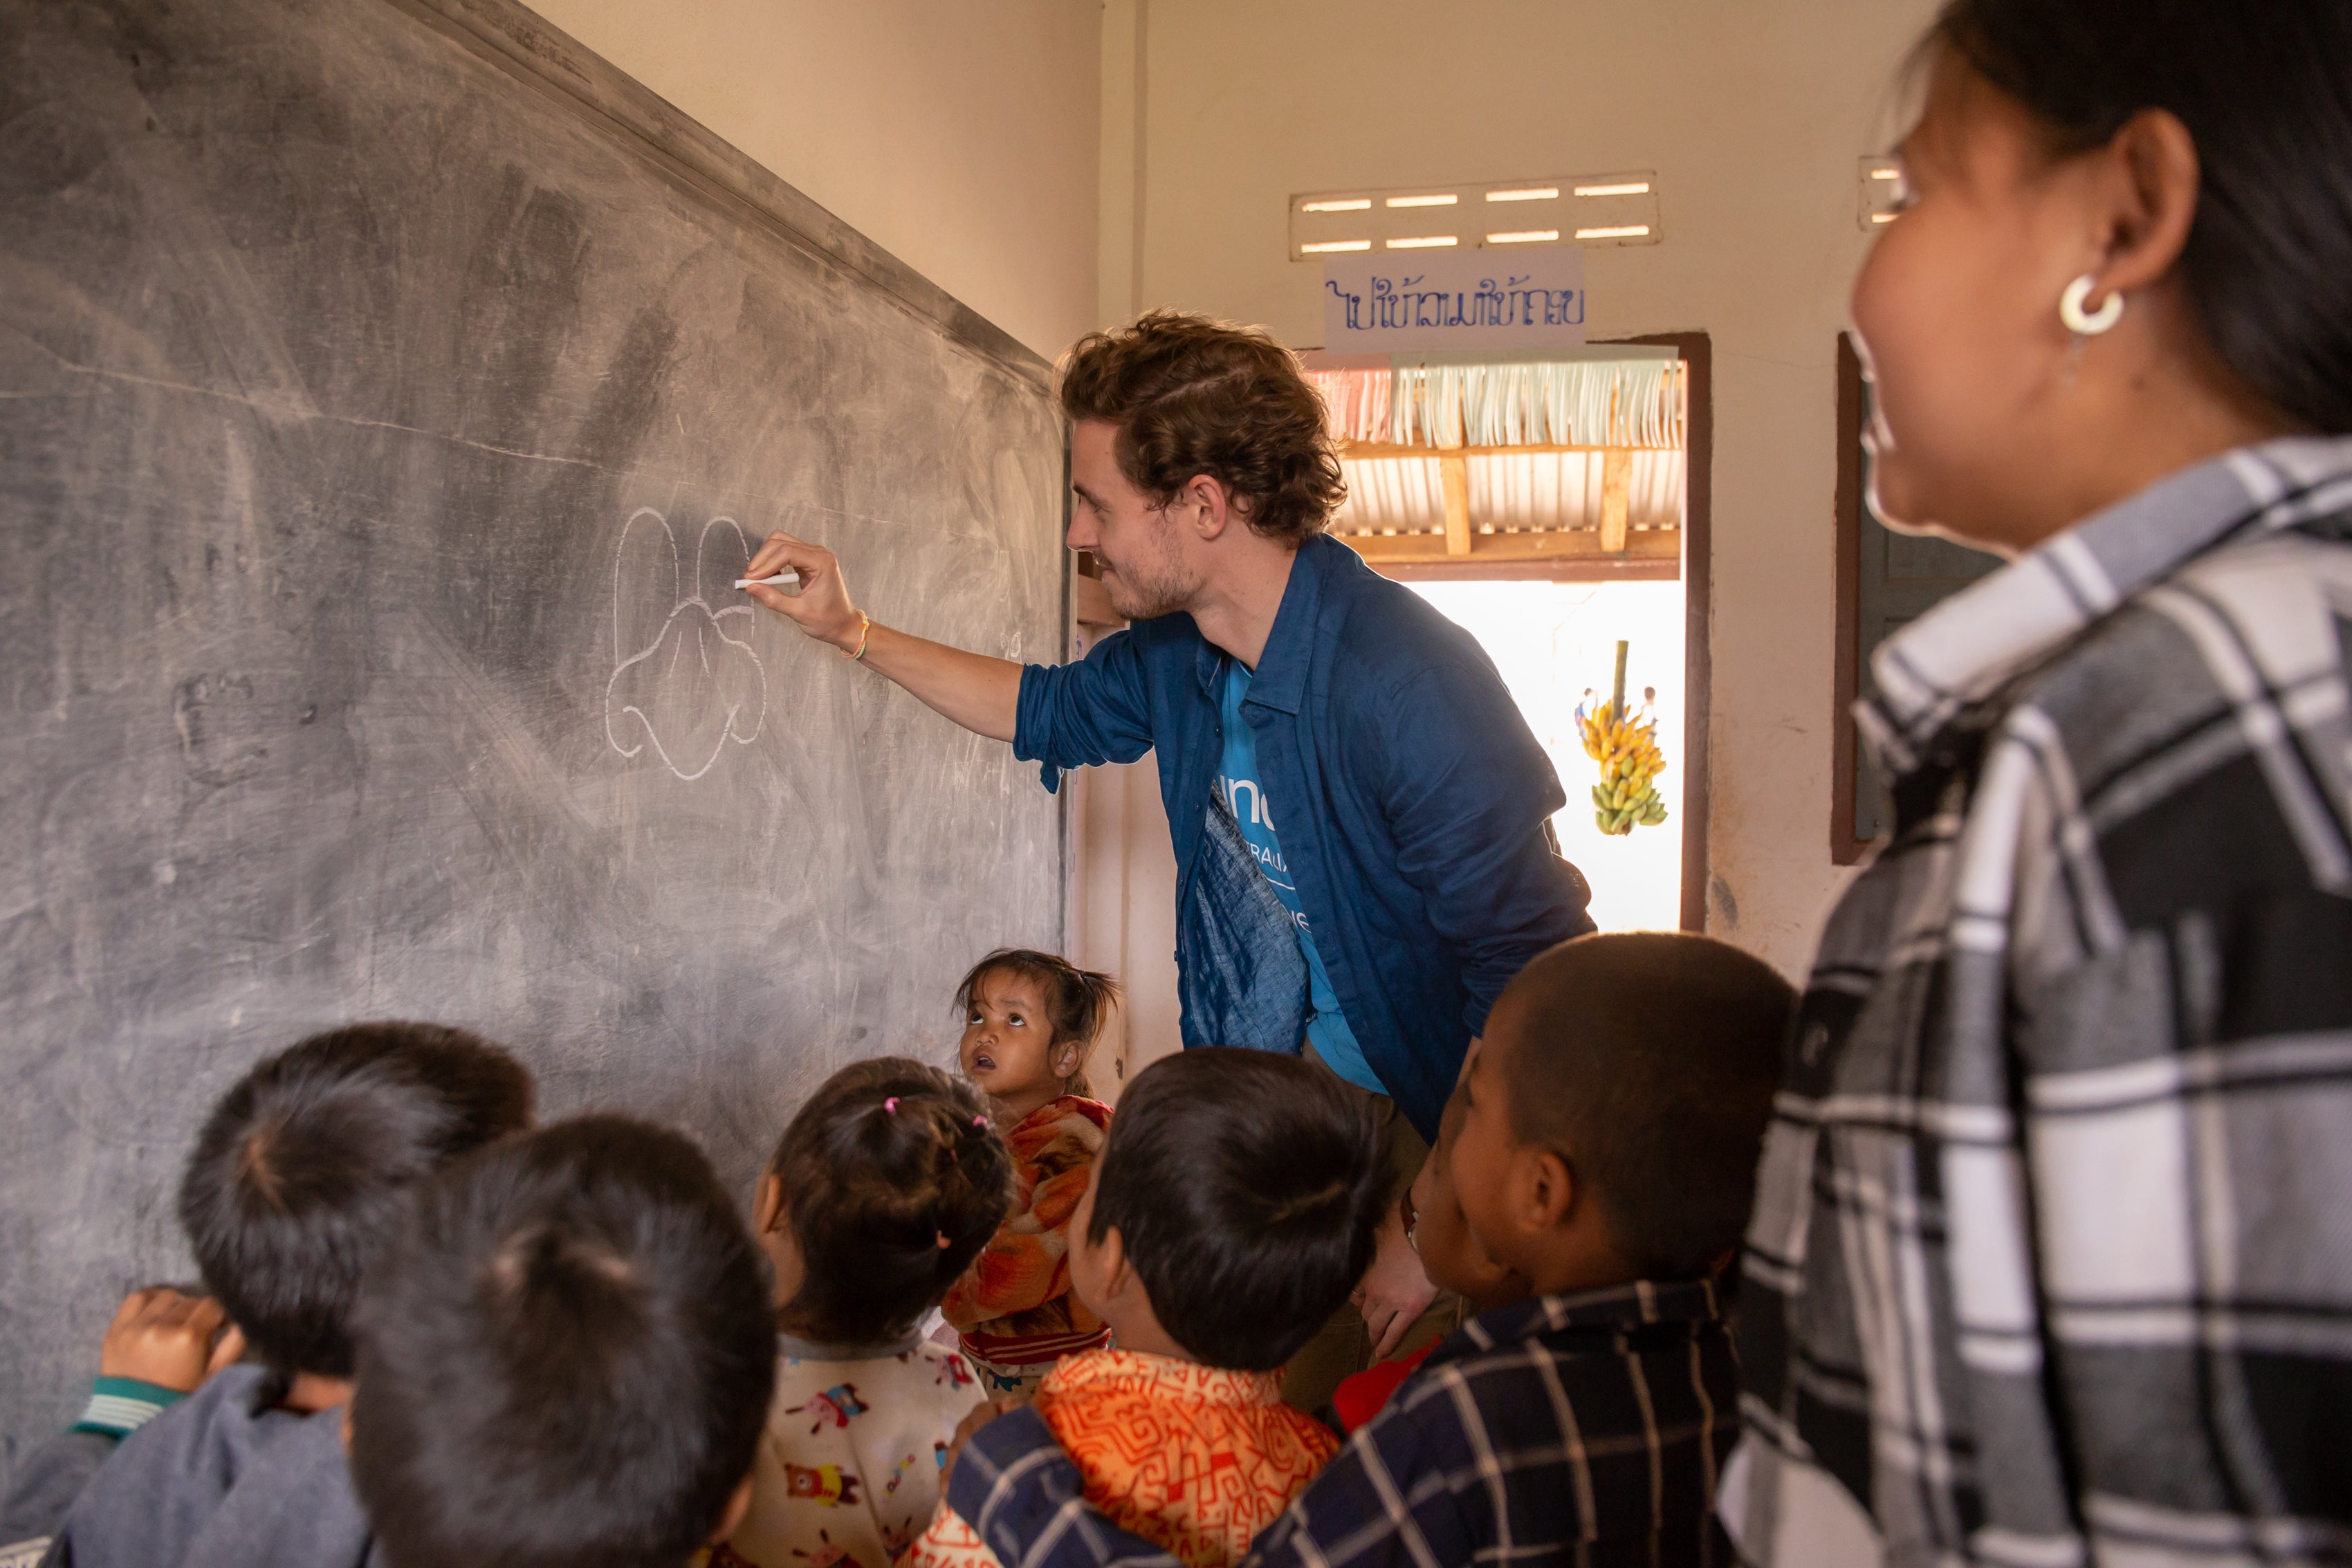 UNICEF Australia Ambassador, Callan McAuliffe, engages in lessons with the children.